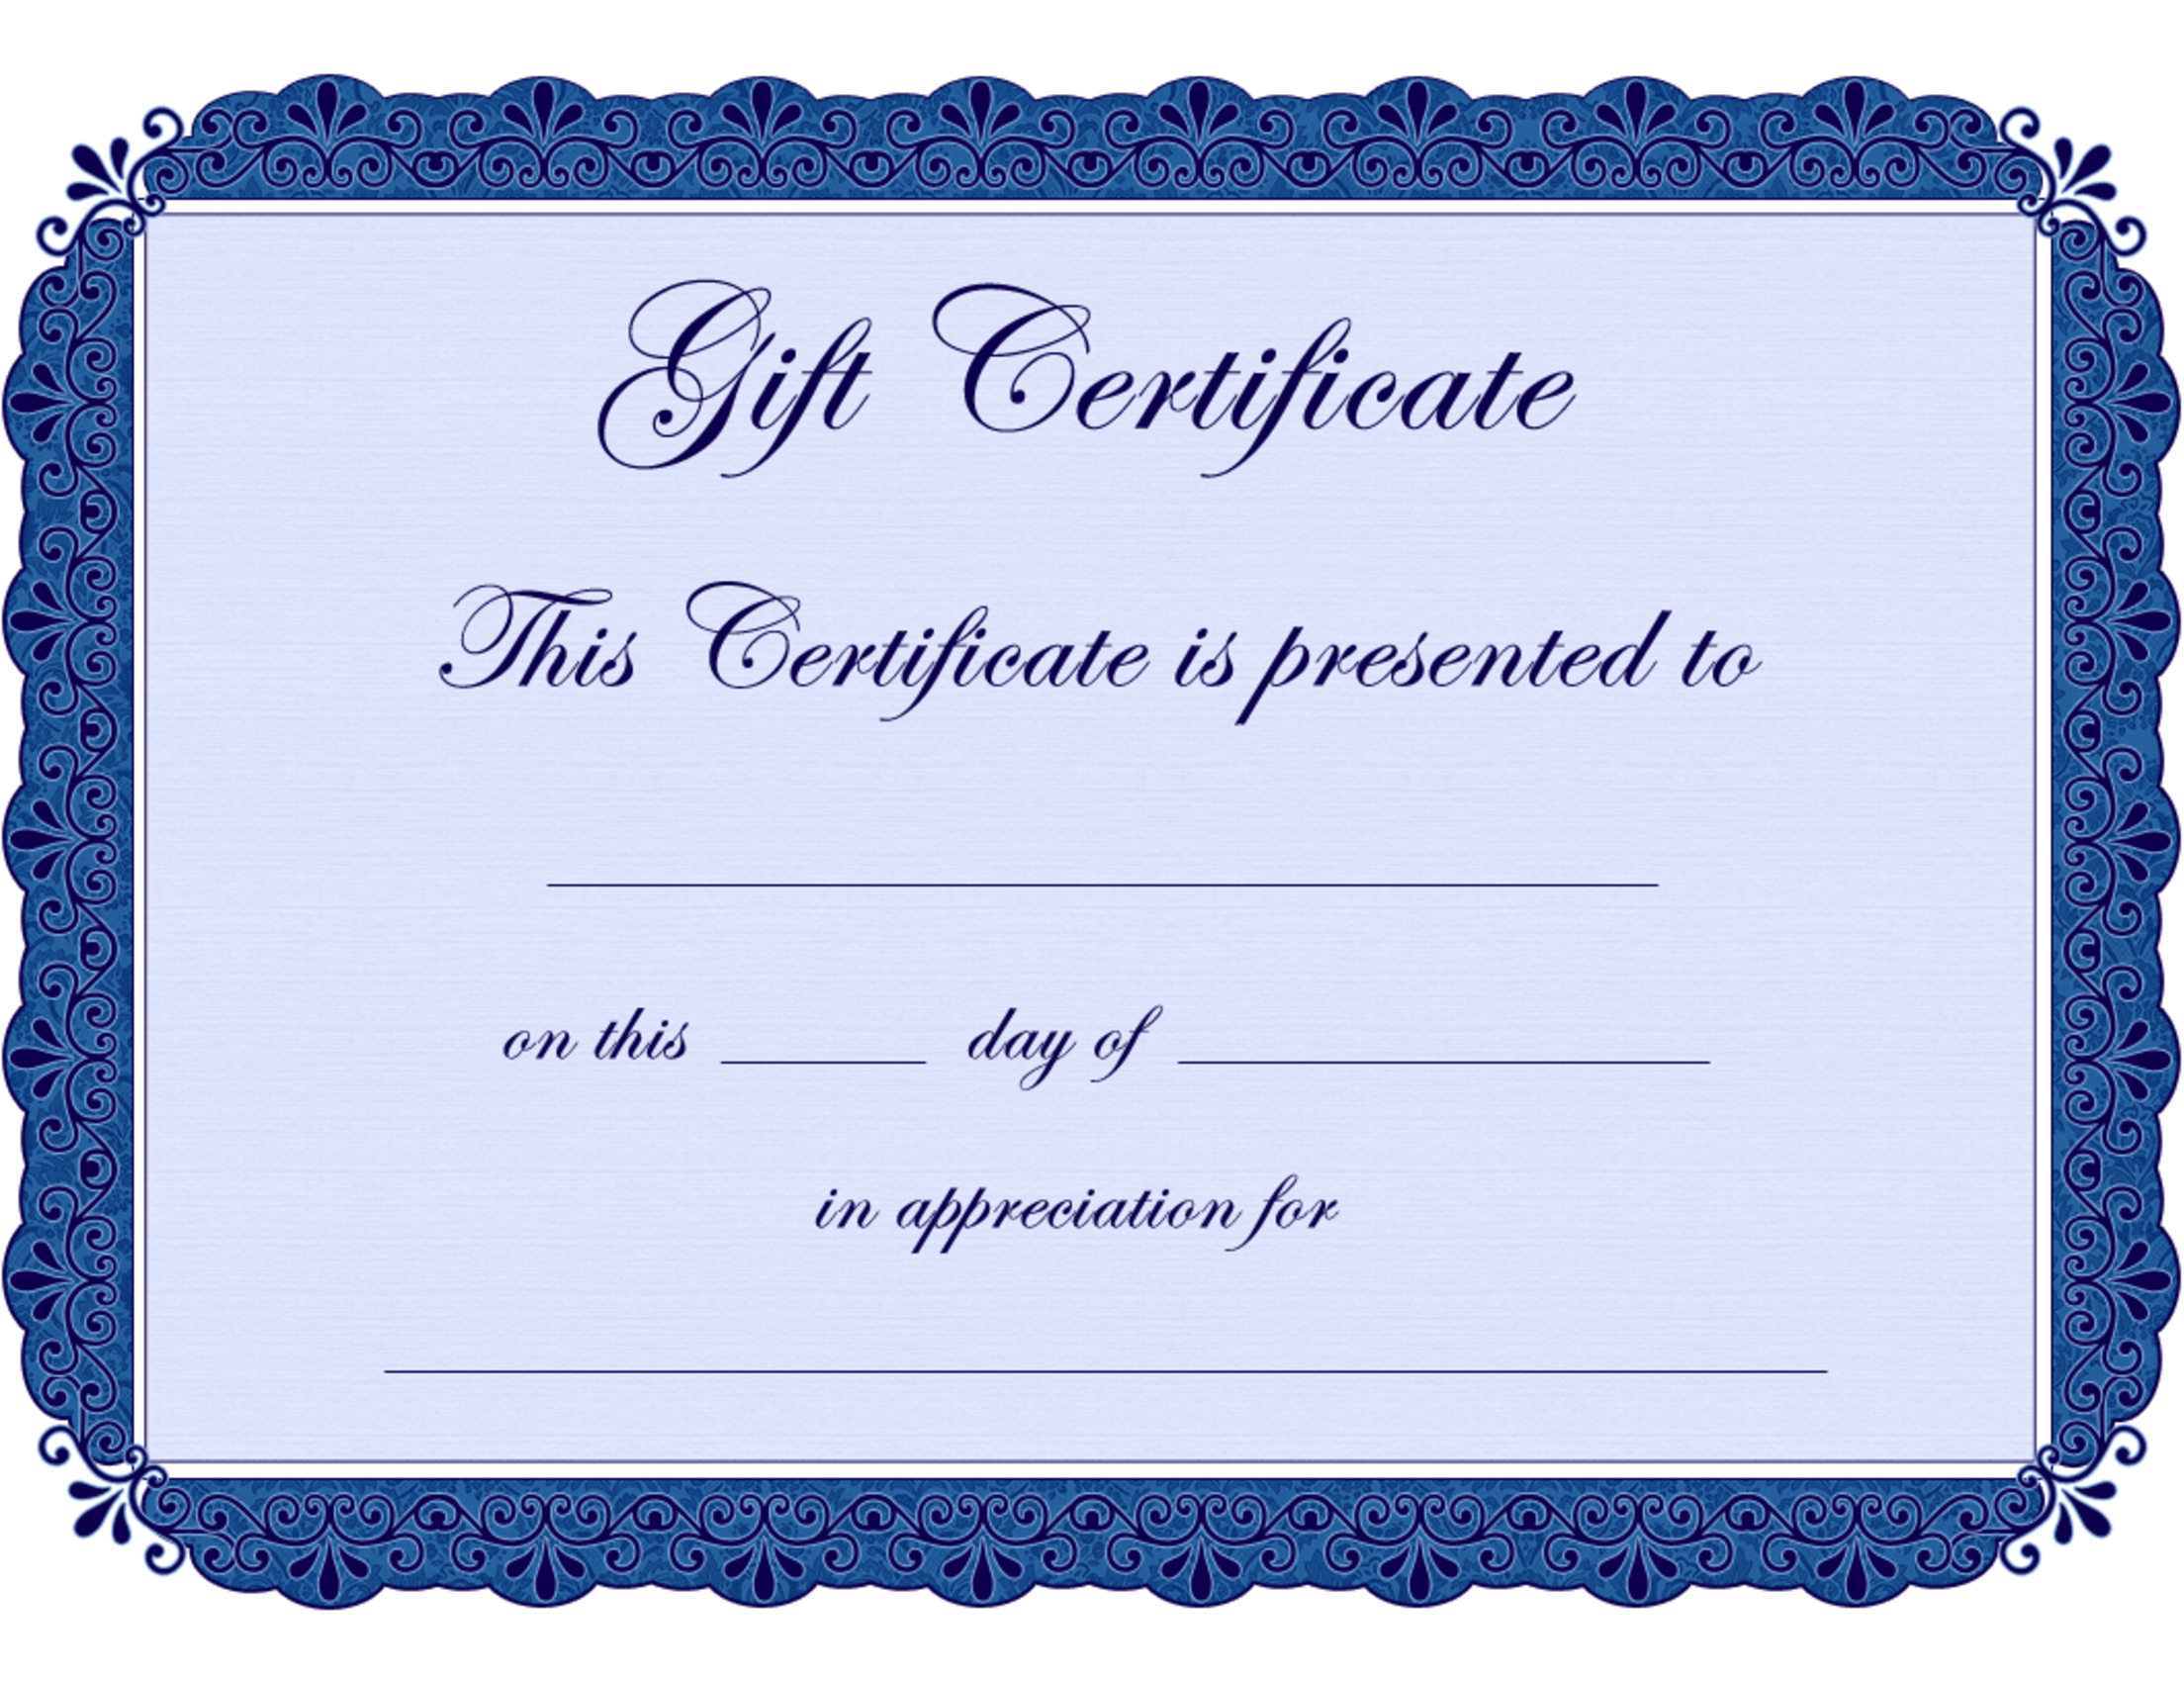 Babysitting Gift Certificate Template